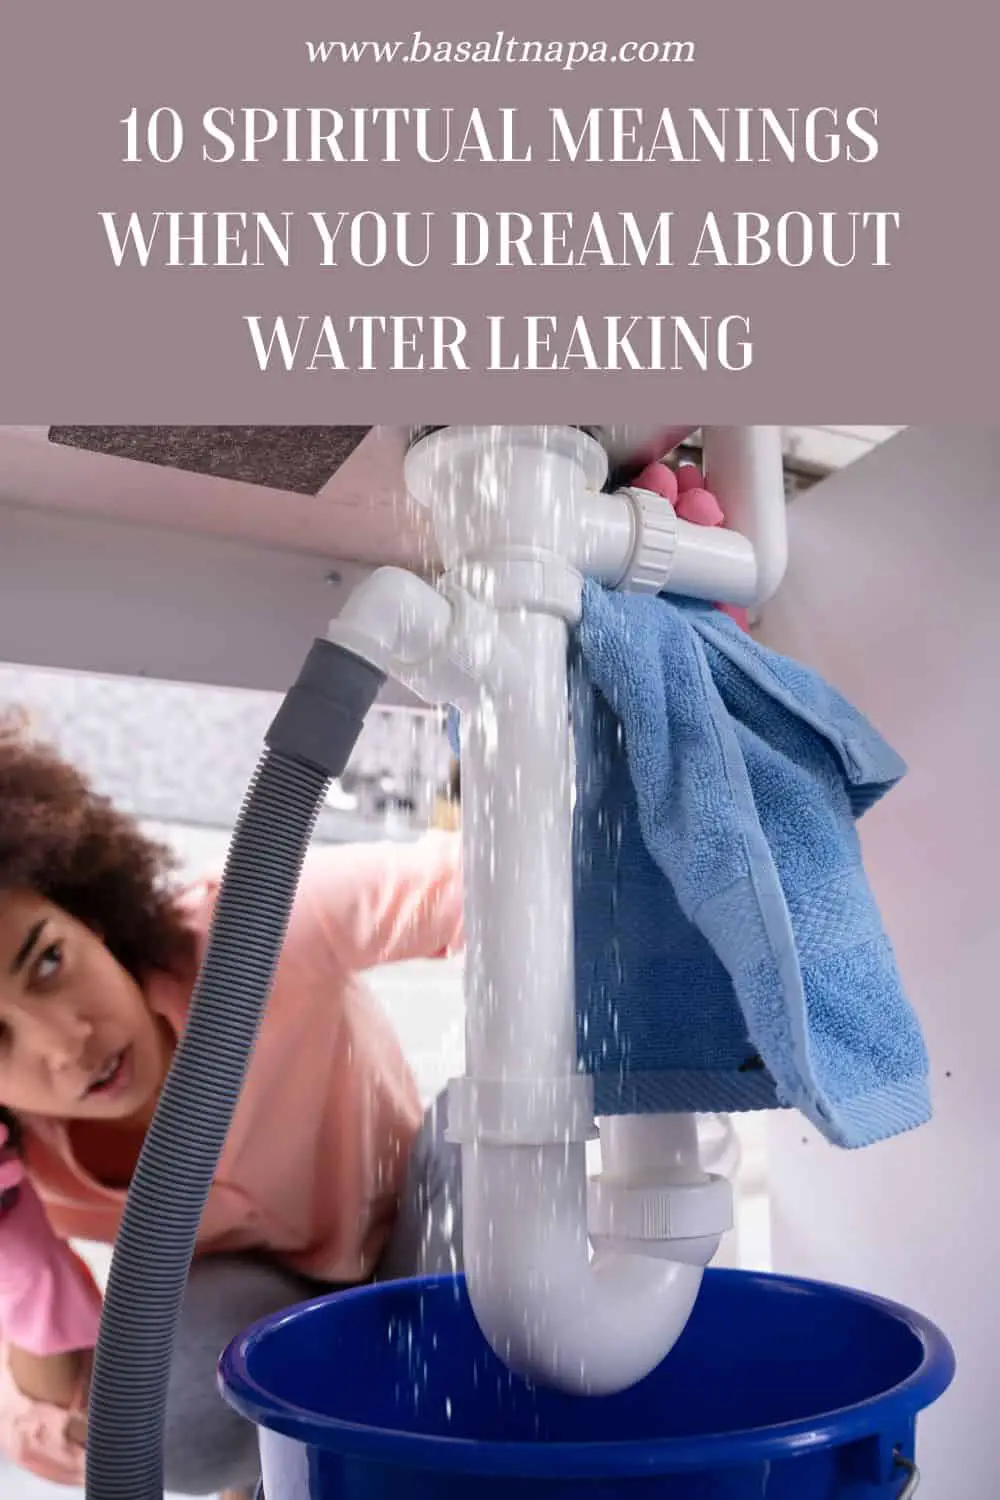 Common Reactions To Water Leaking In House Dreams